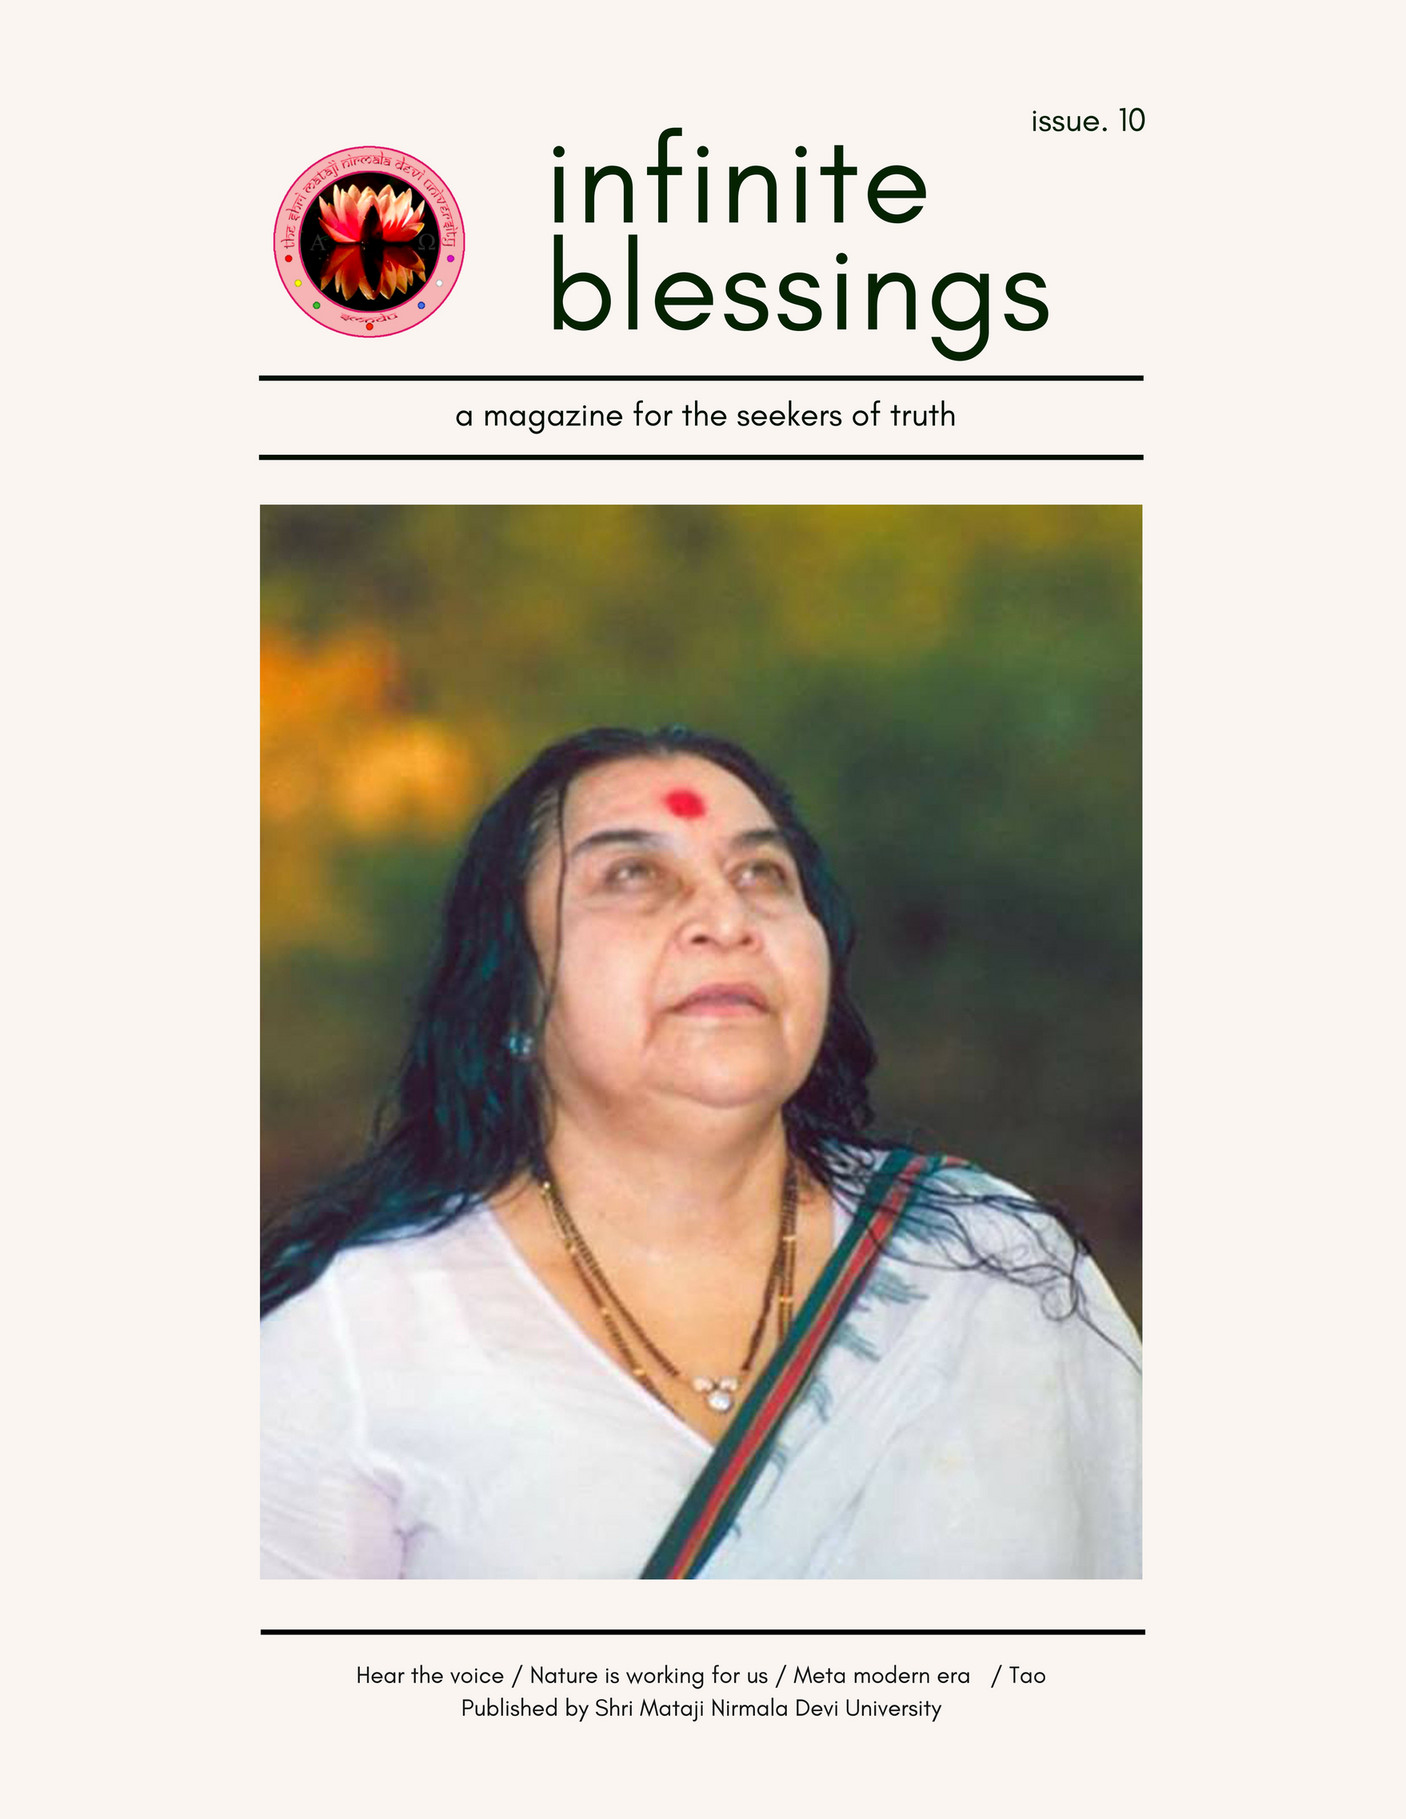 SMNDU - Infinite Blessings Issue 10 April 2018 (1) - Page 1 - Created ...